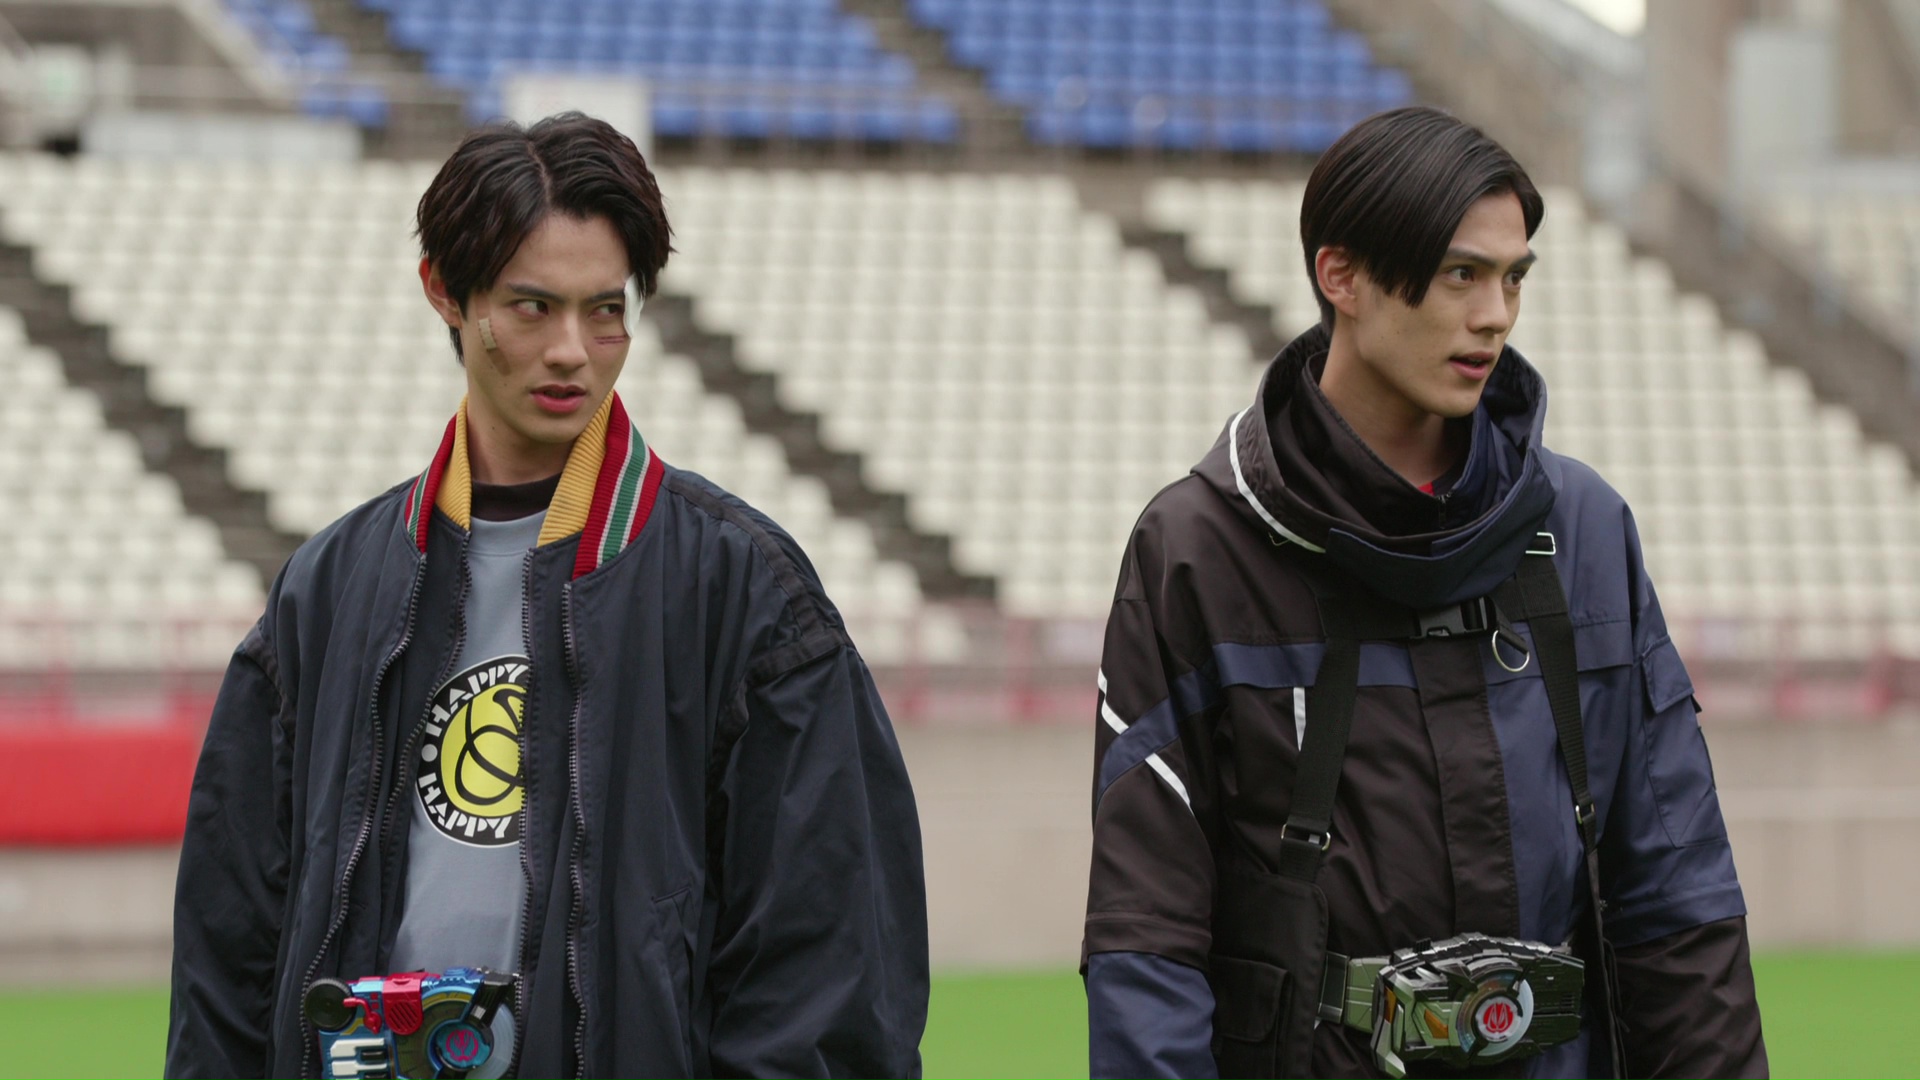 Good Ol’ Review: “Kamen Rider Geats × Revice: Movie Battle Royale” a Solid Viewing Experience